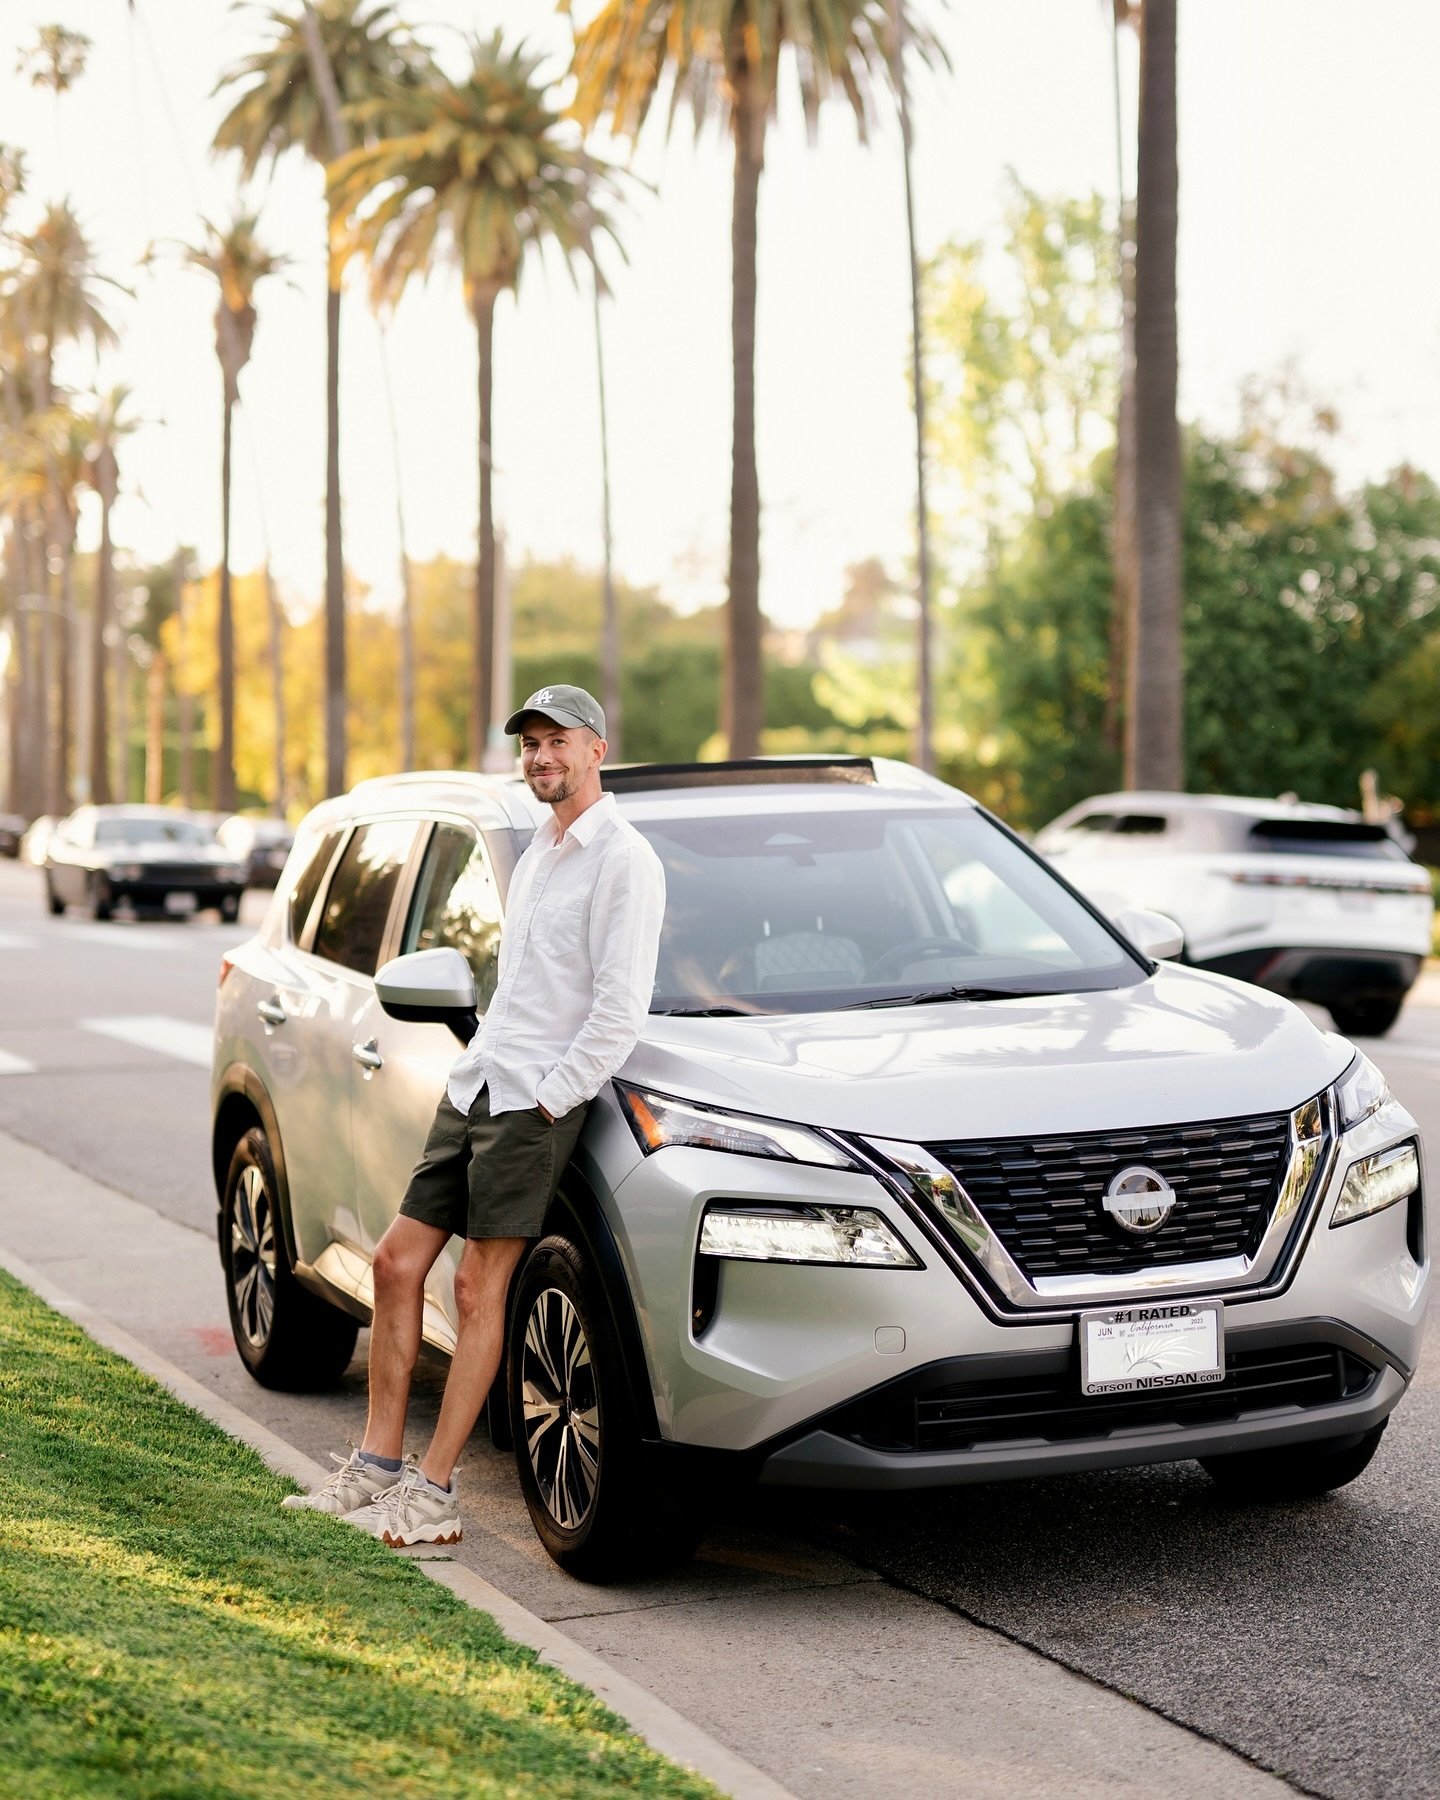 Taking a snapshot with a new car has become quite the tradition for us. And would you believe it? This beauty marks my third Nissan &ndash; I guess you could say I&rsquo;m a bit of a Nissan enthusiast! It&rsquo;s also our third car here in the USA, a